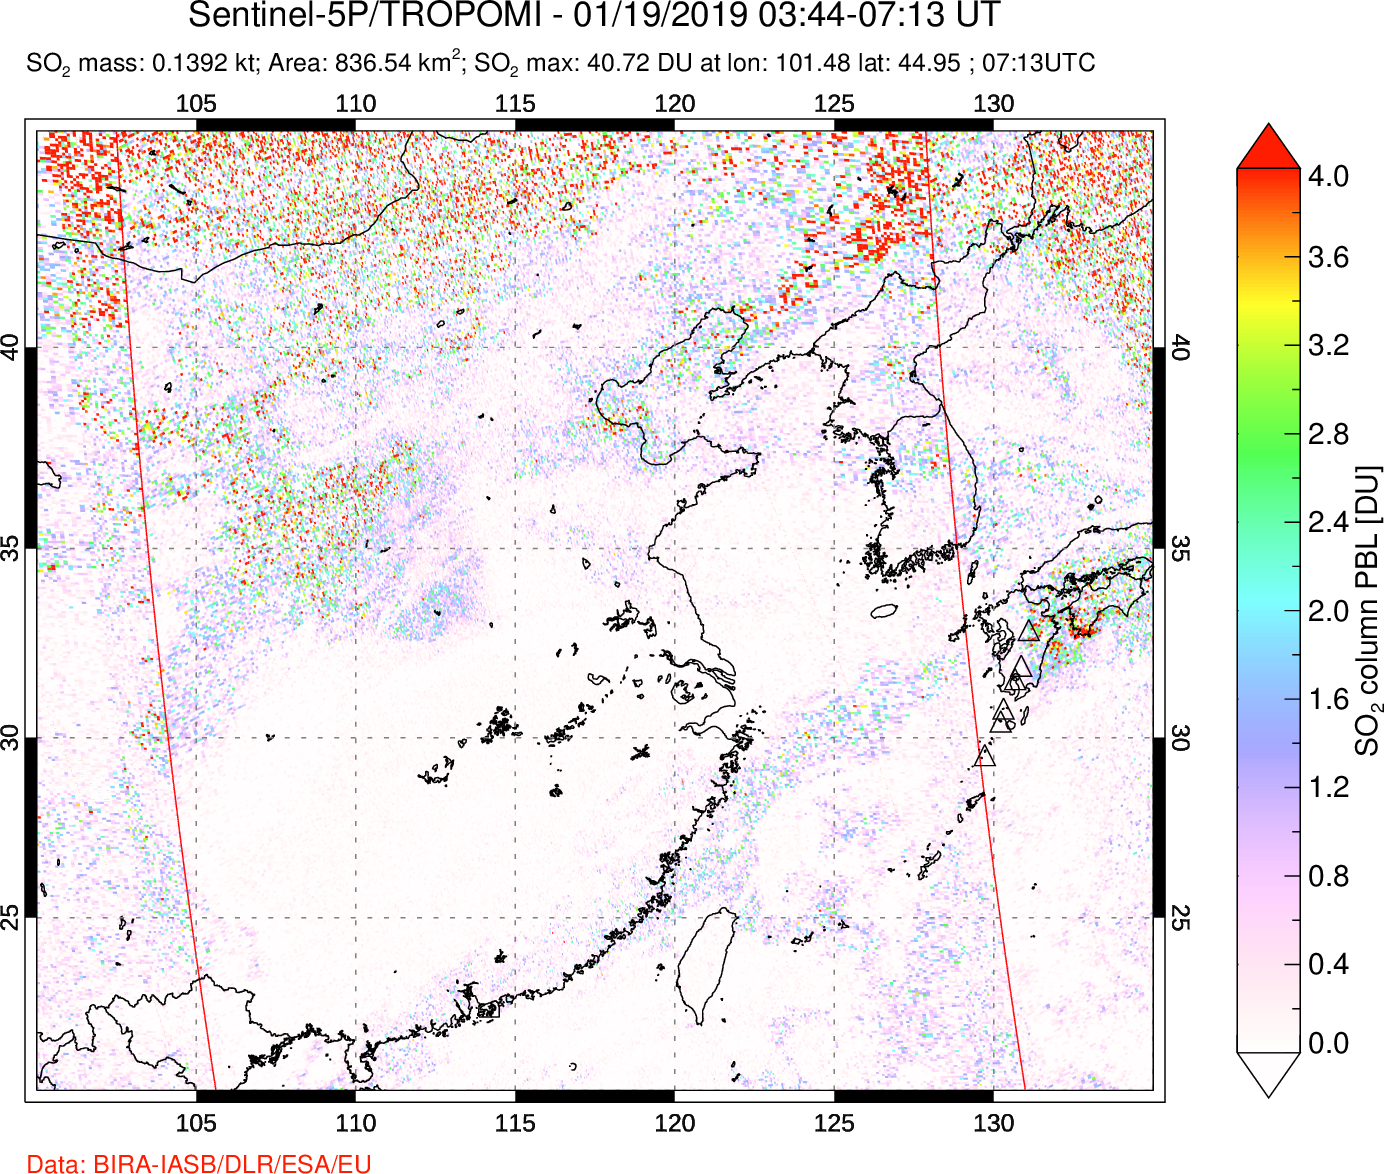 A sulfur dioxide image over Eastern China on Jan 19, 2019.